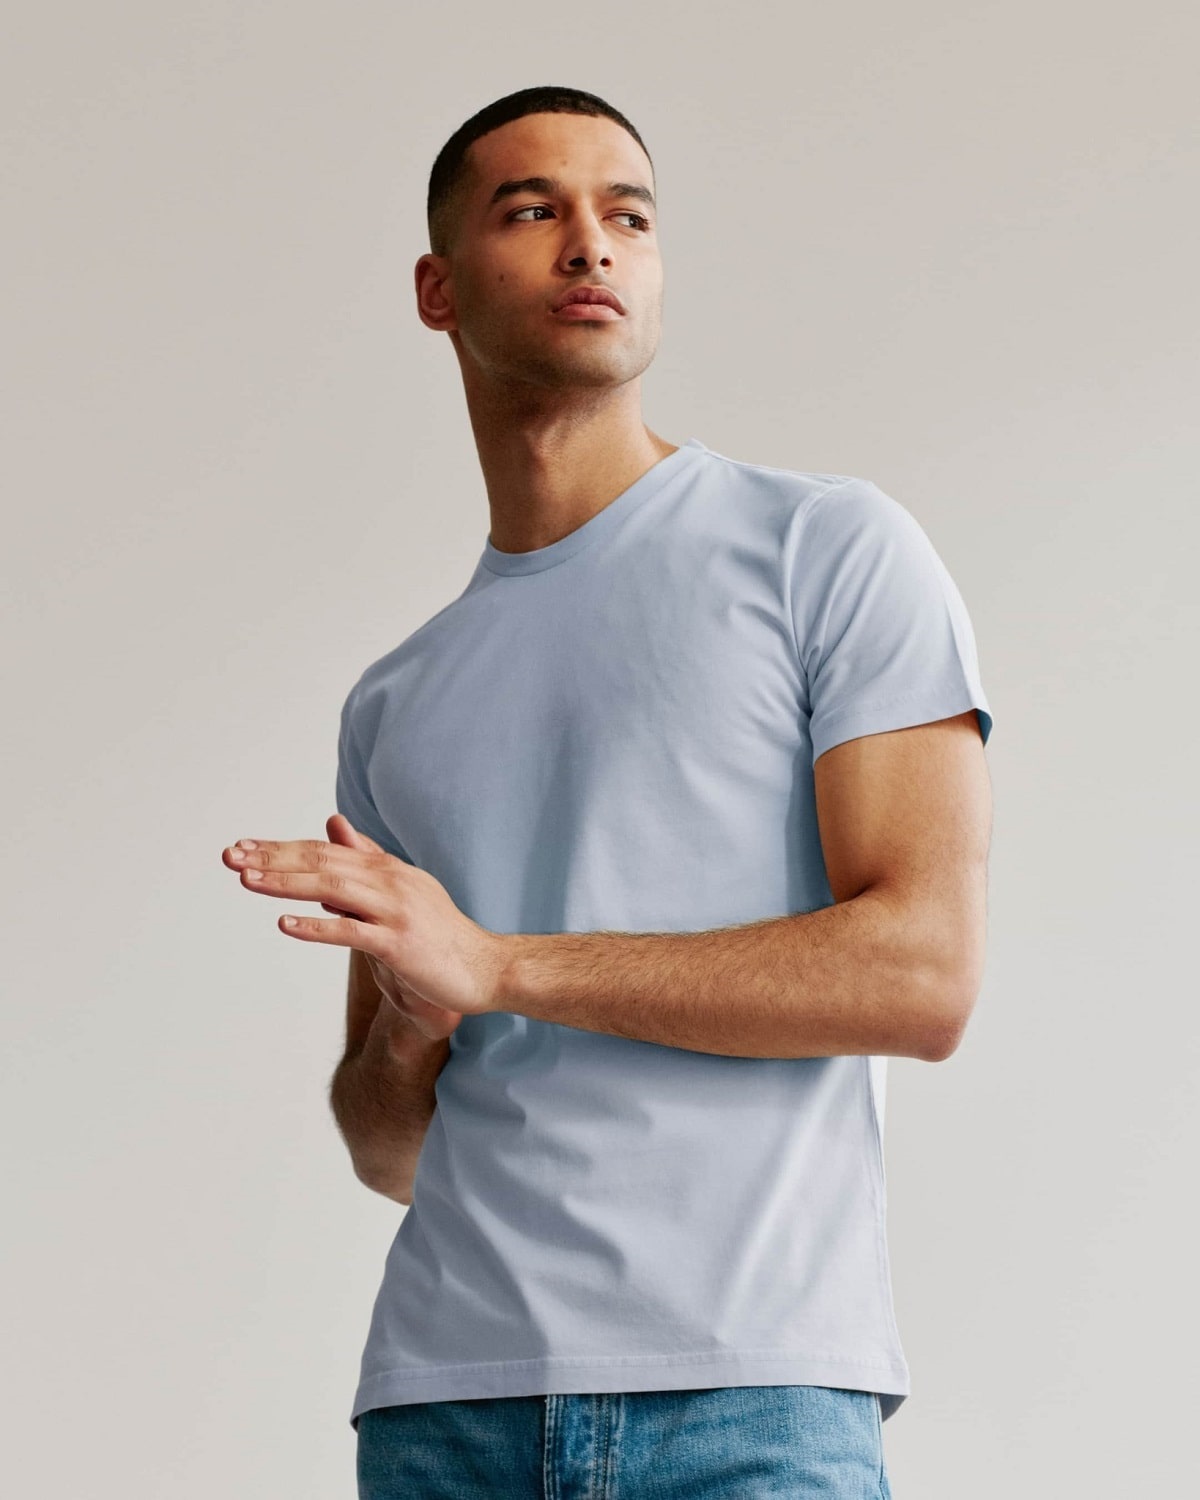 5 Secrets to Looking Great in a T-Shirt